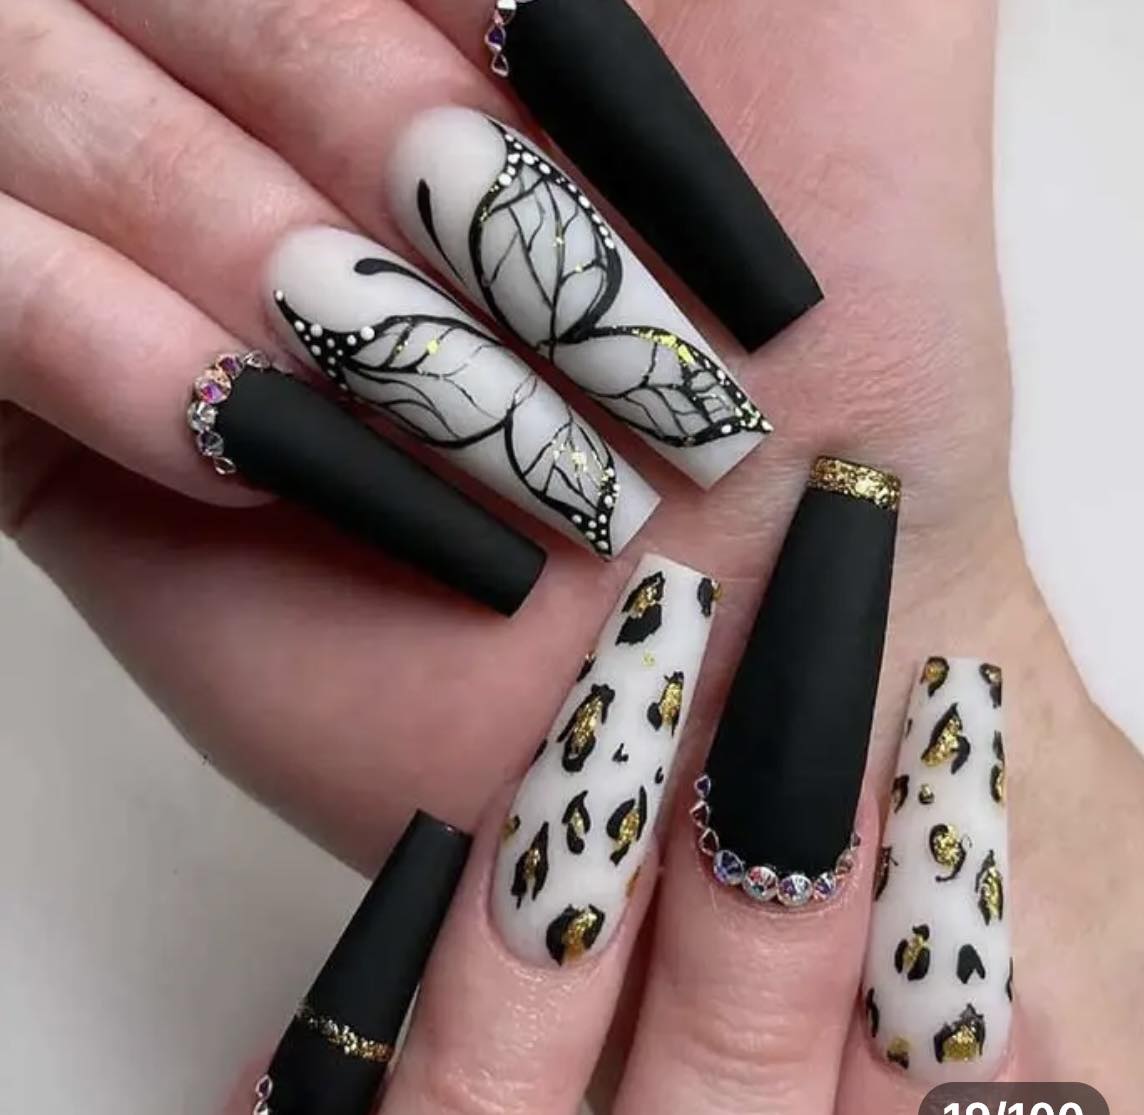 Long Coffin Press on Nails. White, Black & Gold with Butterflies. Easy and quick to apply. Great for those special occasions, parties or add an edge to any outfit. Gorgeous, flattering and you can re-use them again and again.